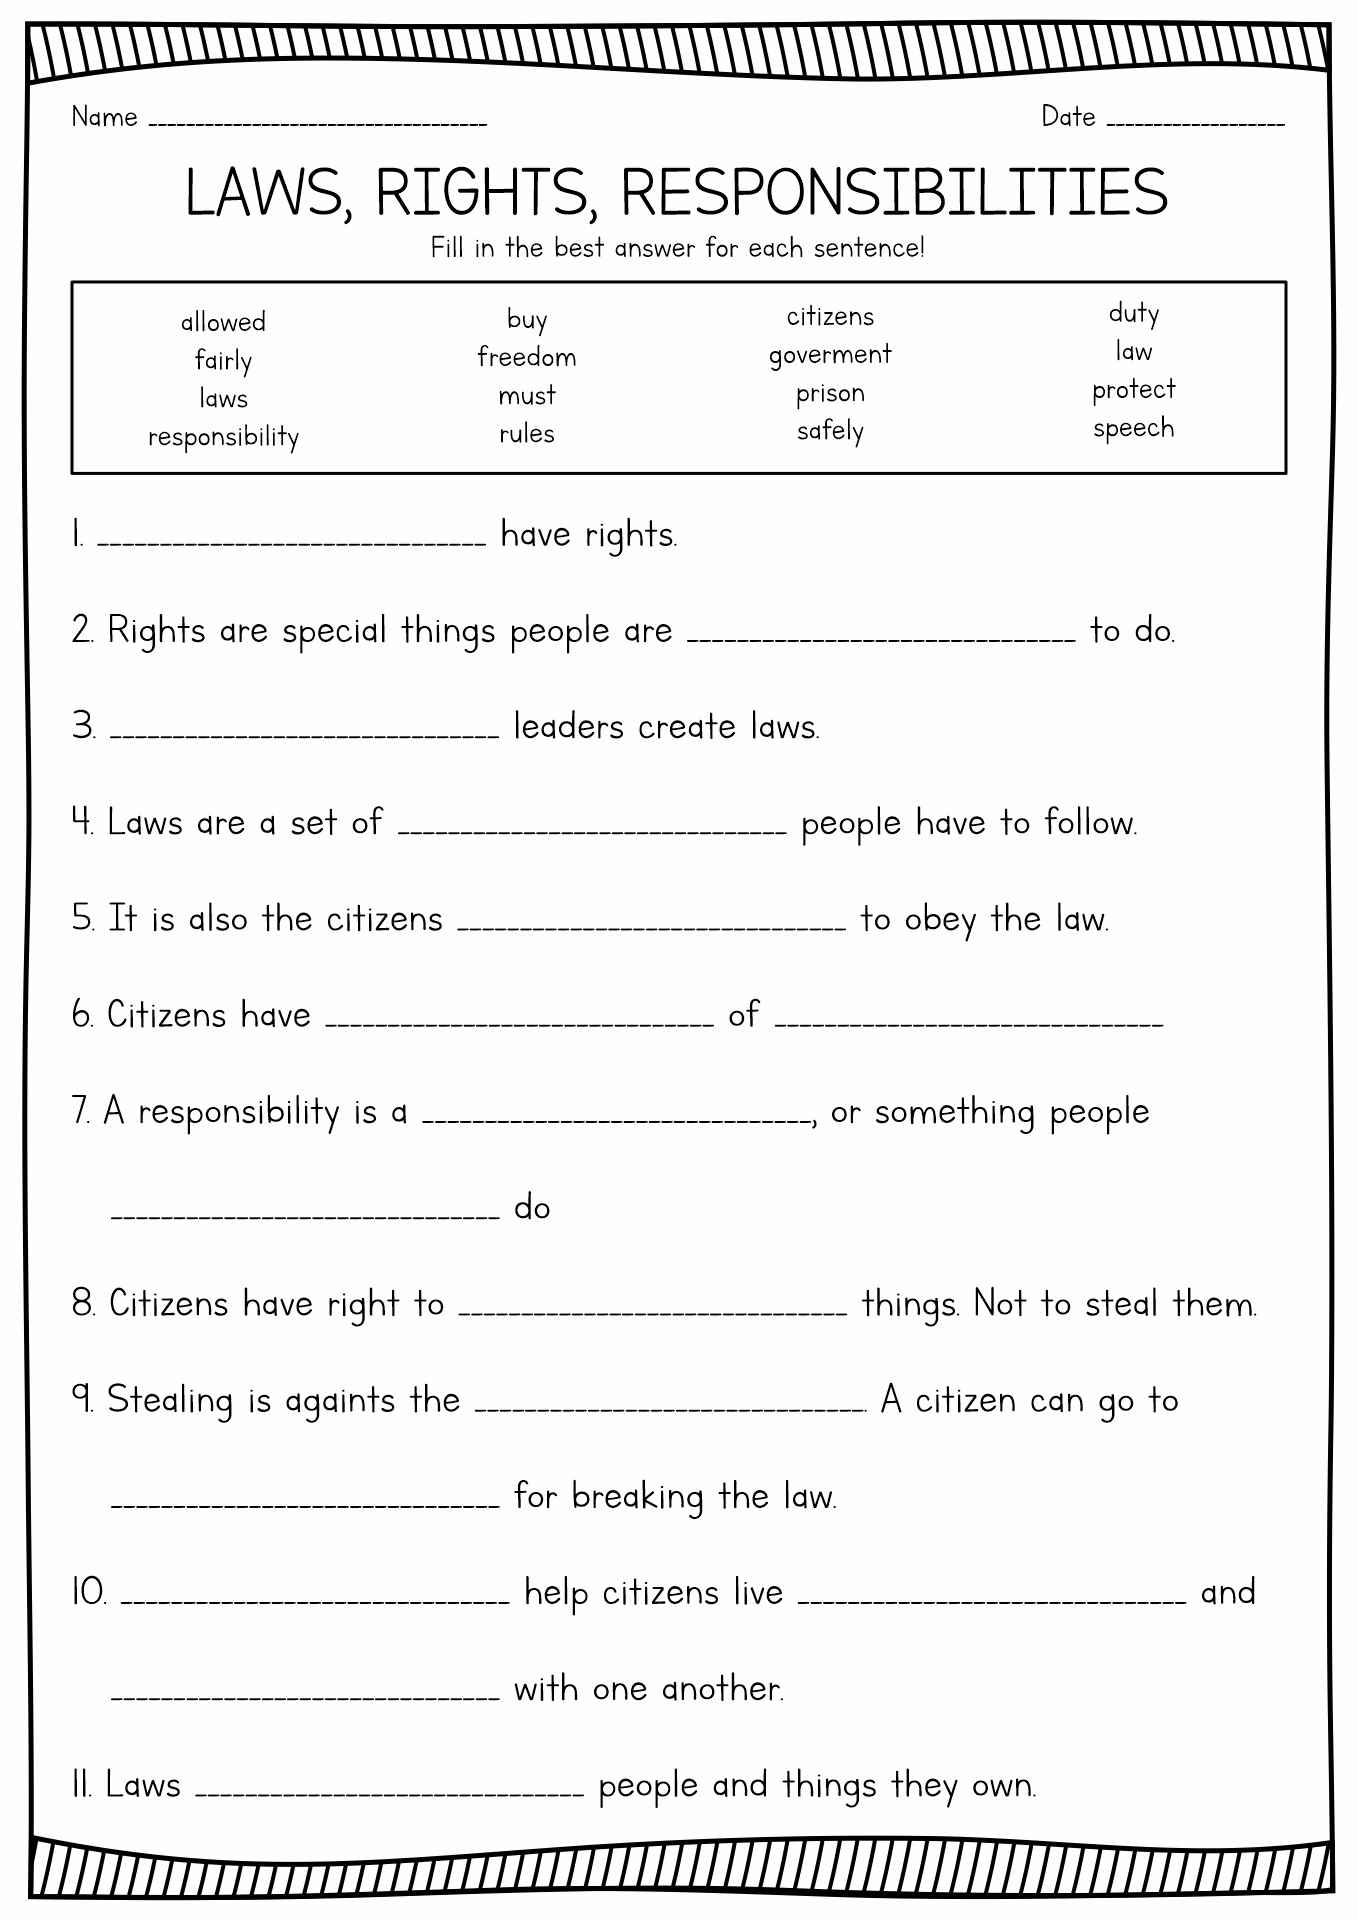 Citizen Rights and Responsibilities Worksheet